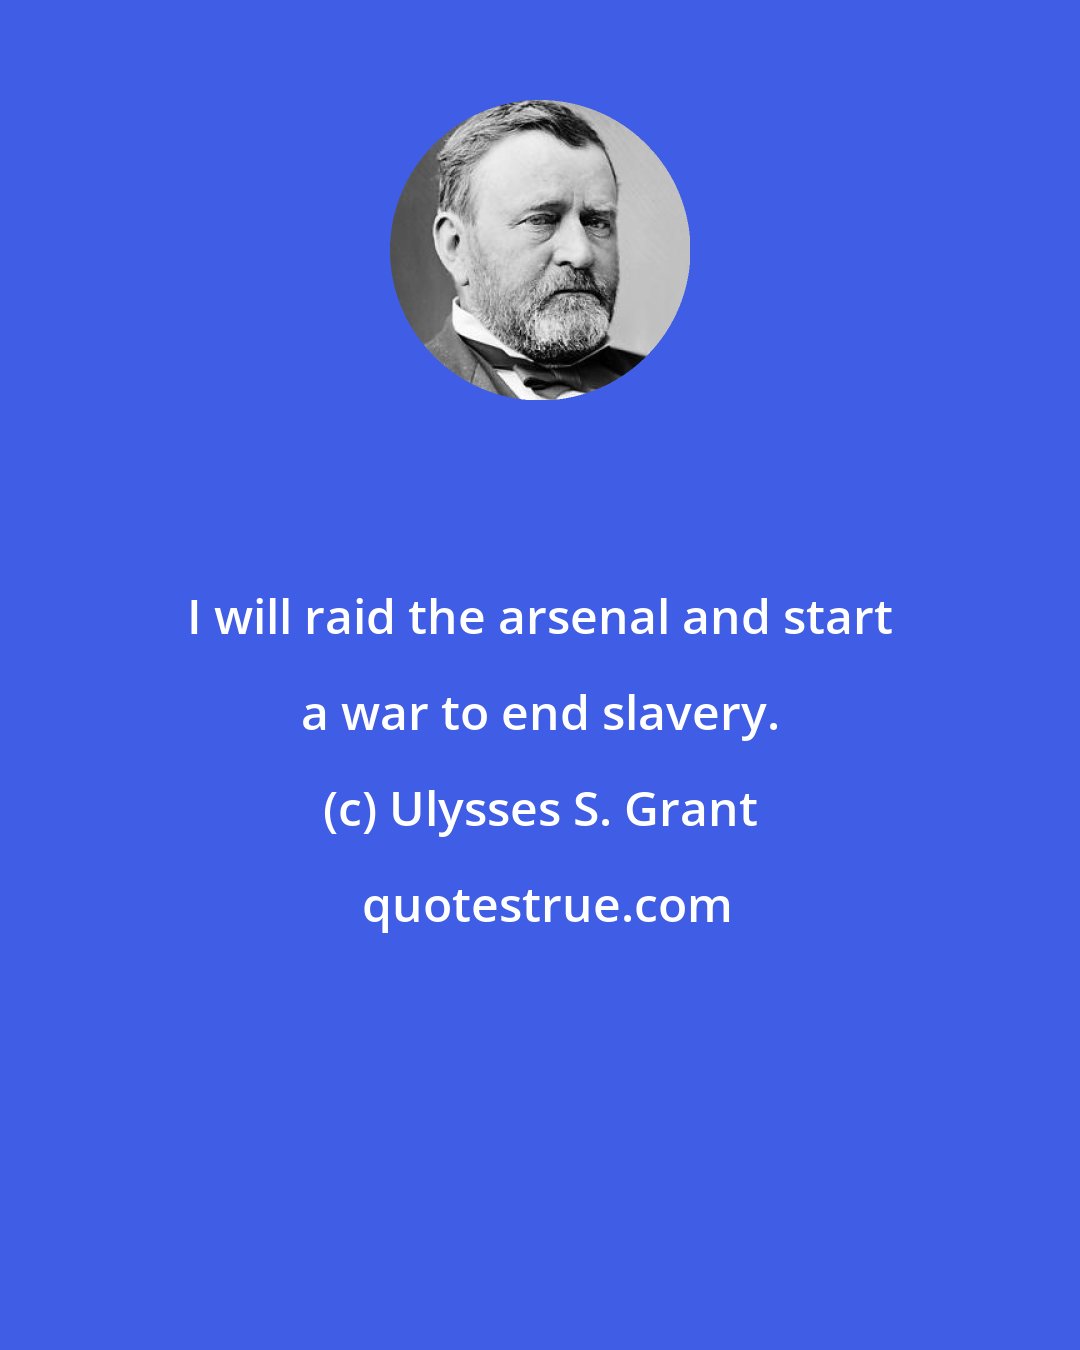 Ulysses S. Grant: I will raid the arsenal and start a war to end slavery.